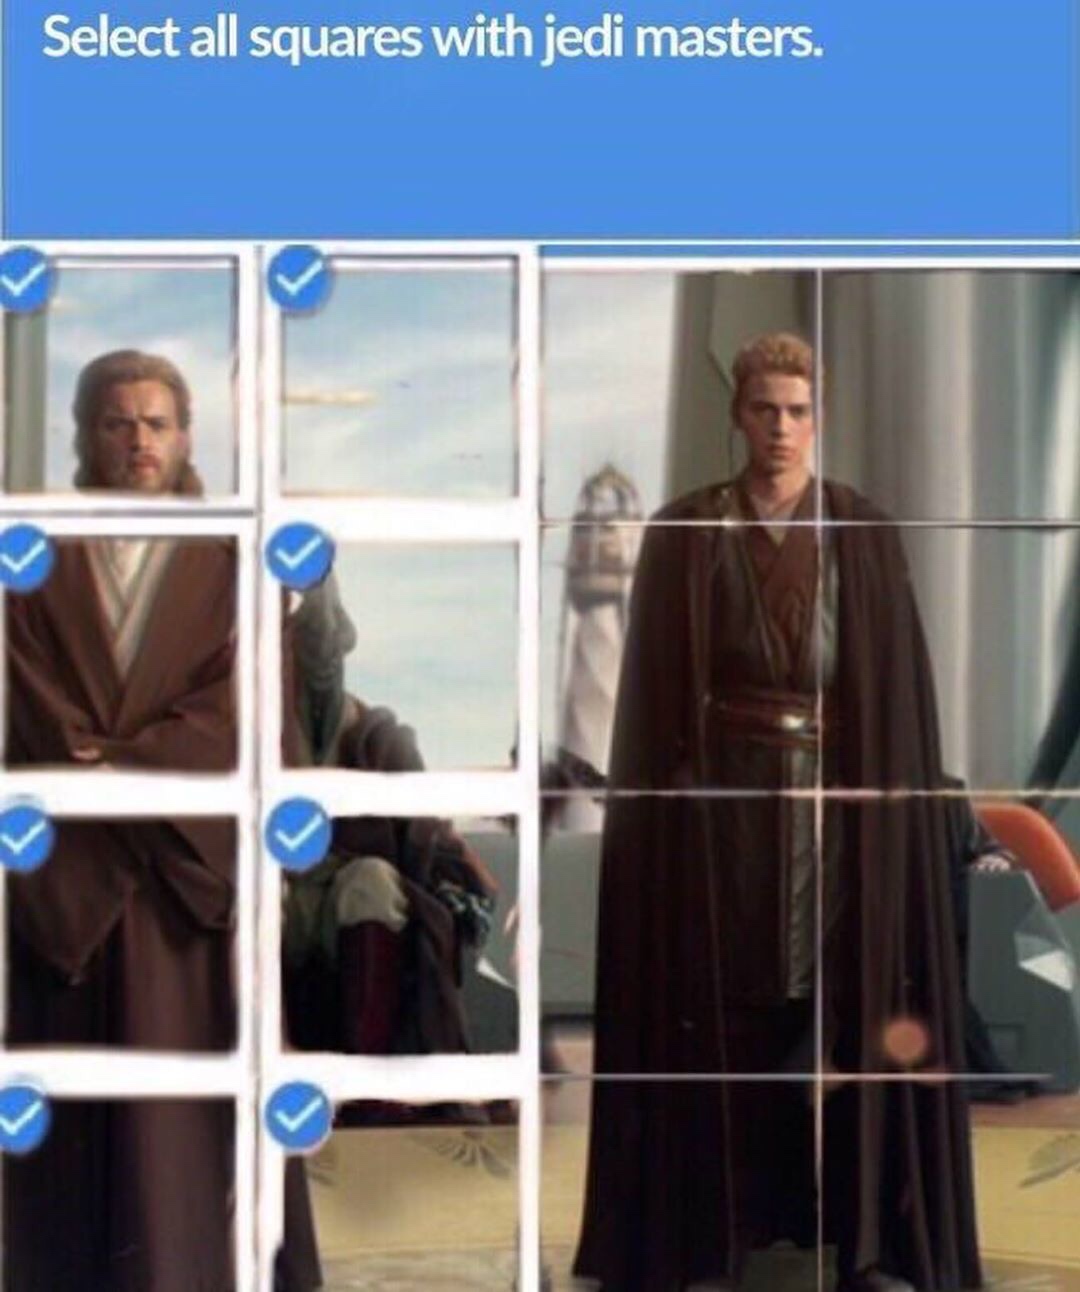 star wars memes its unfair - Select all squares with jedi masters.